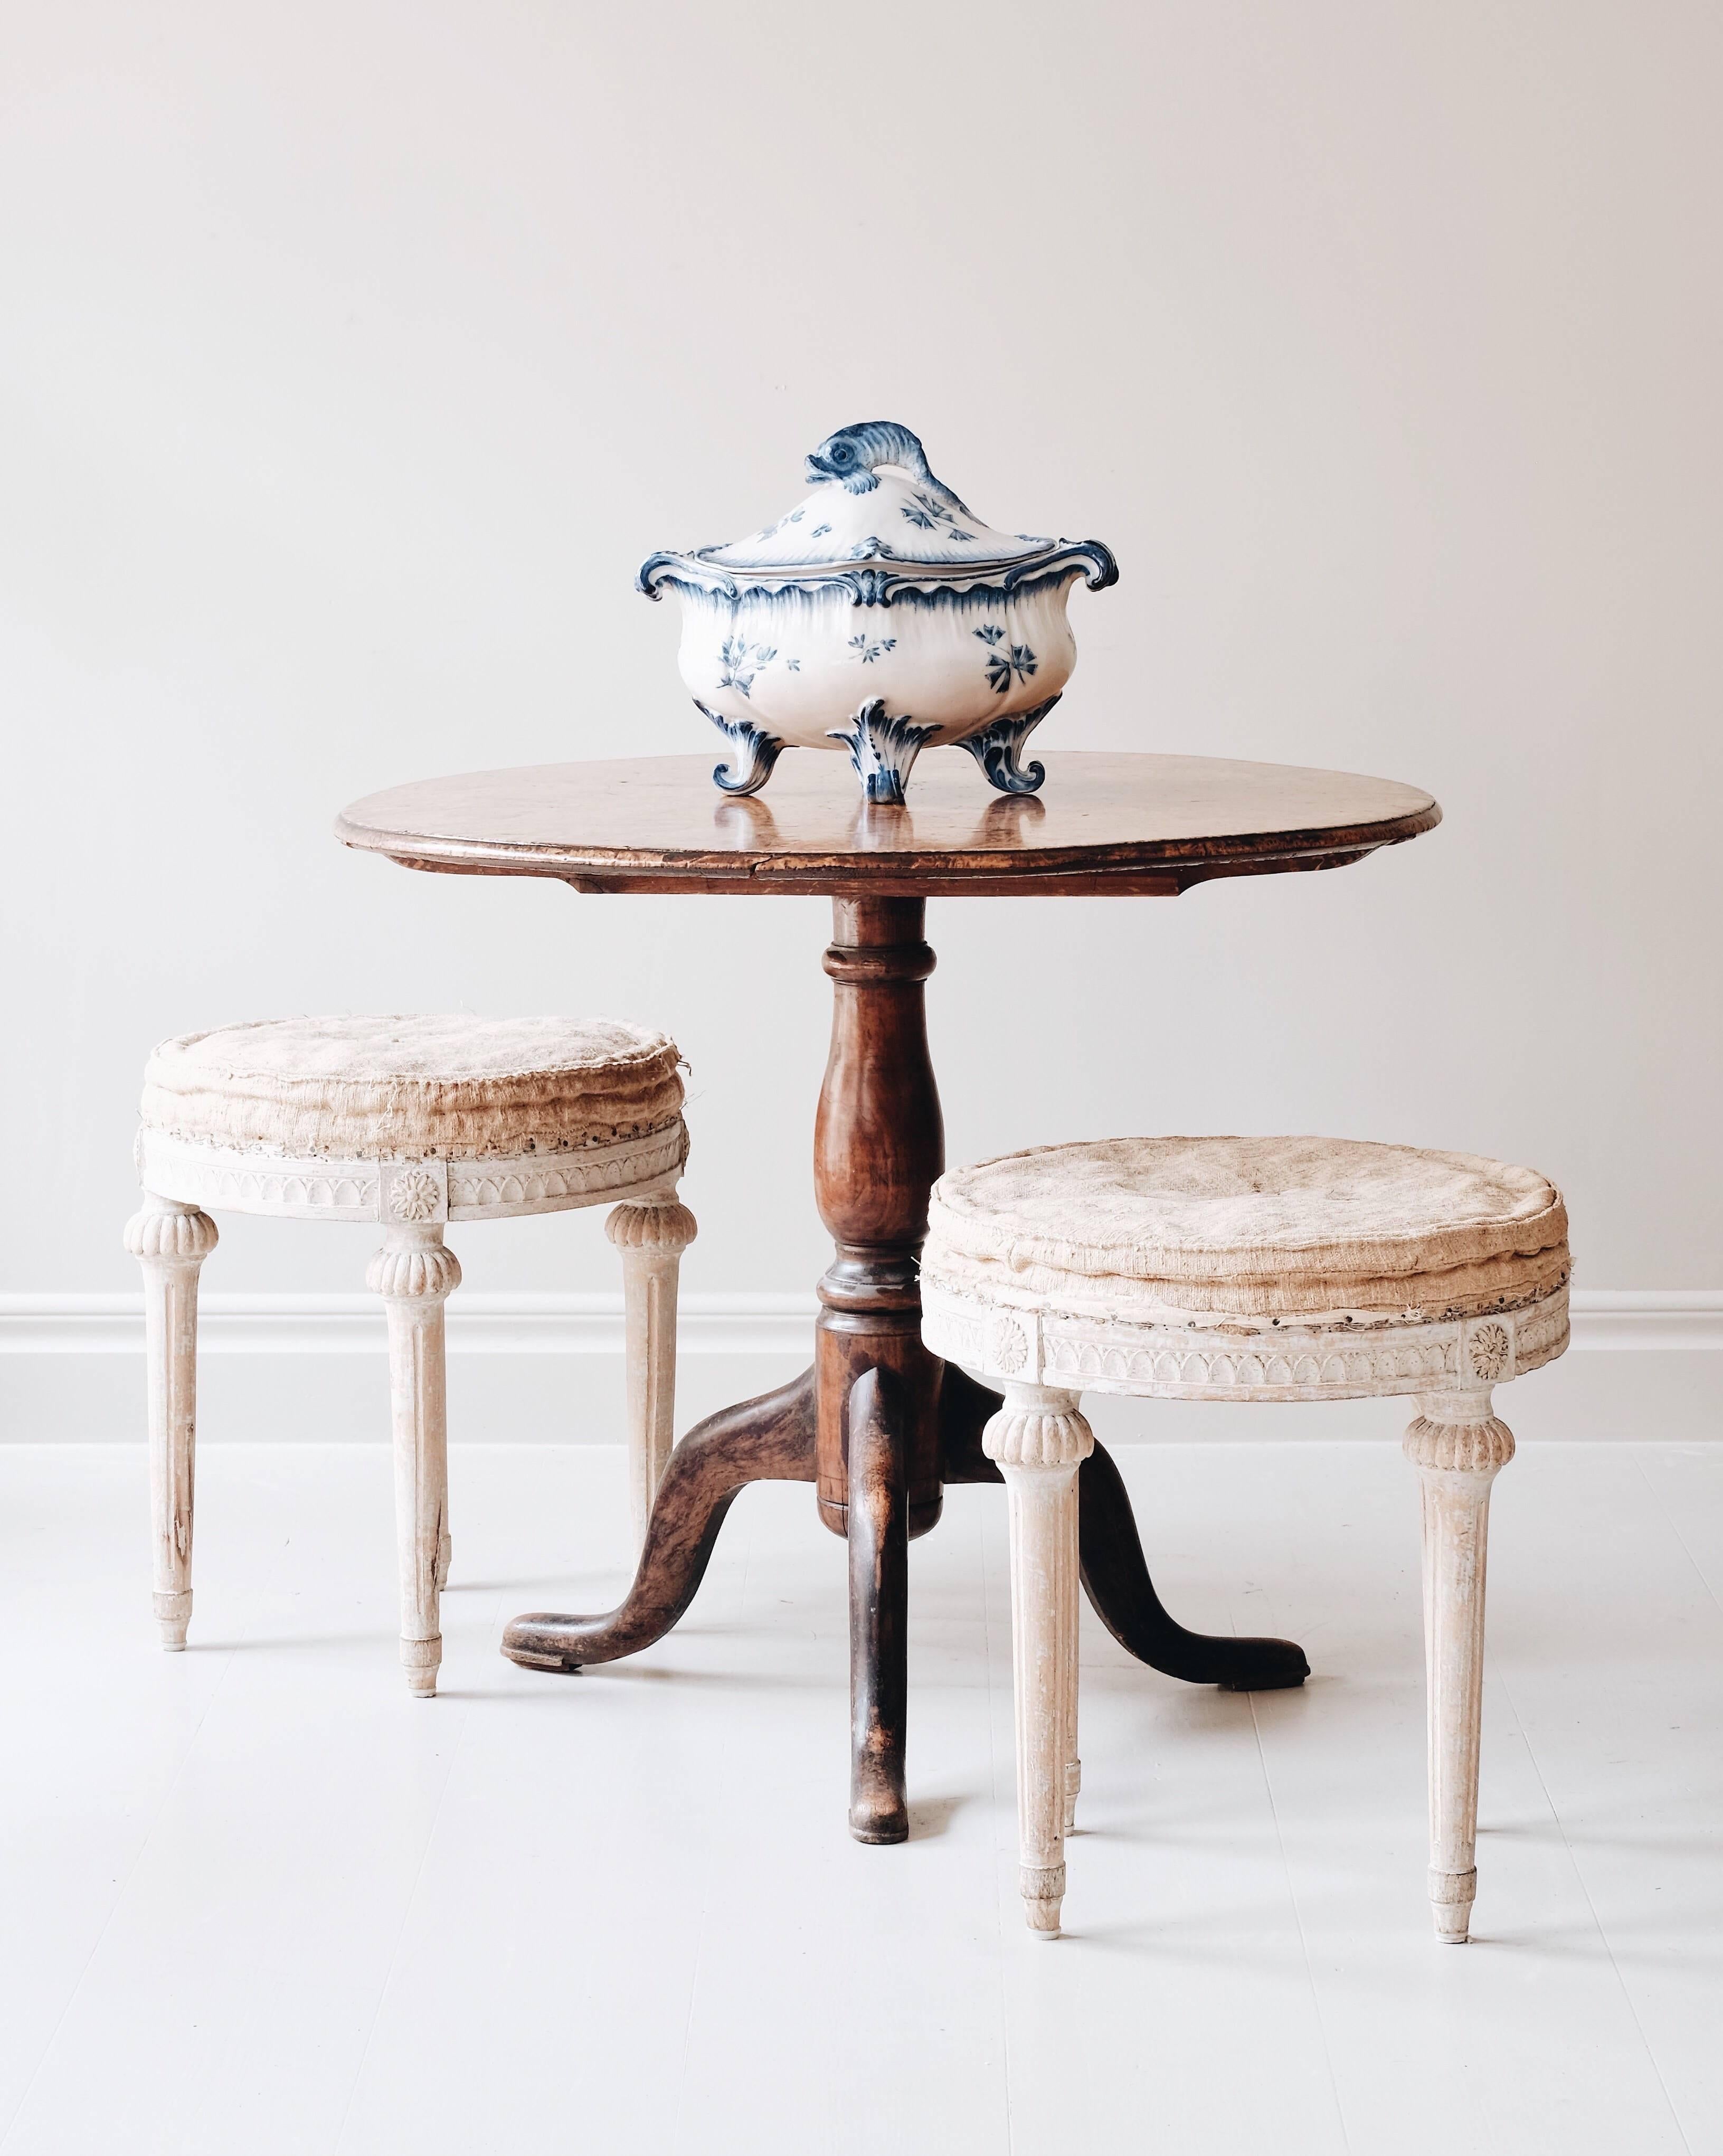 Fine pair of large round Gustavian stools in original color and seat cushion, circa 1790, Sweden.